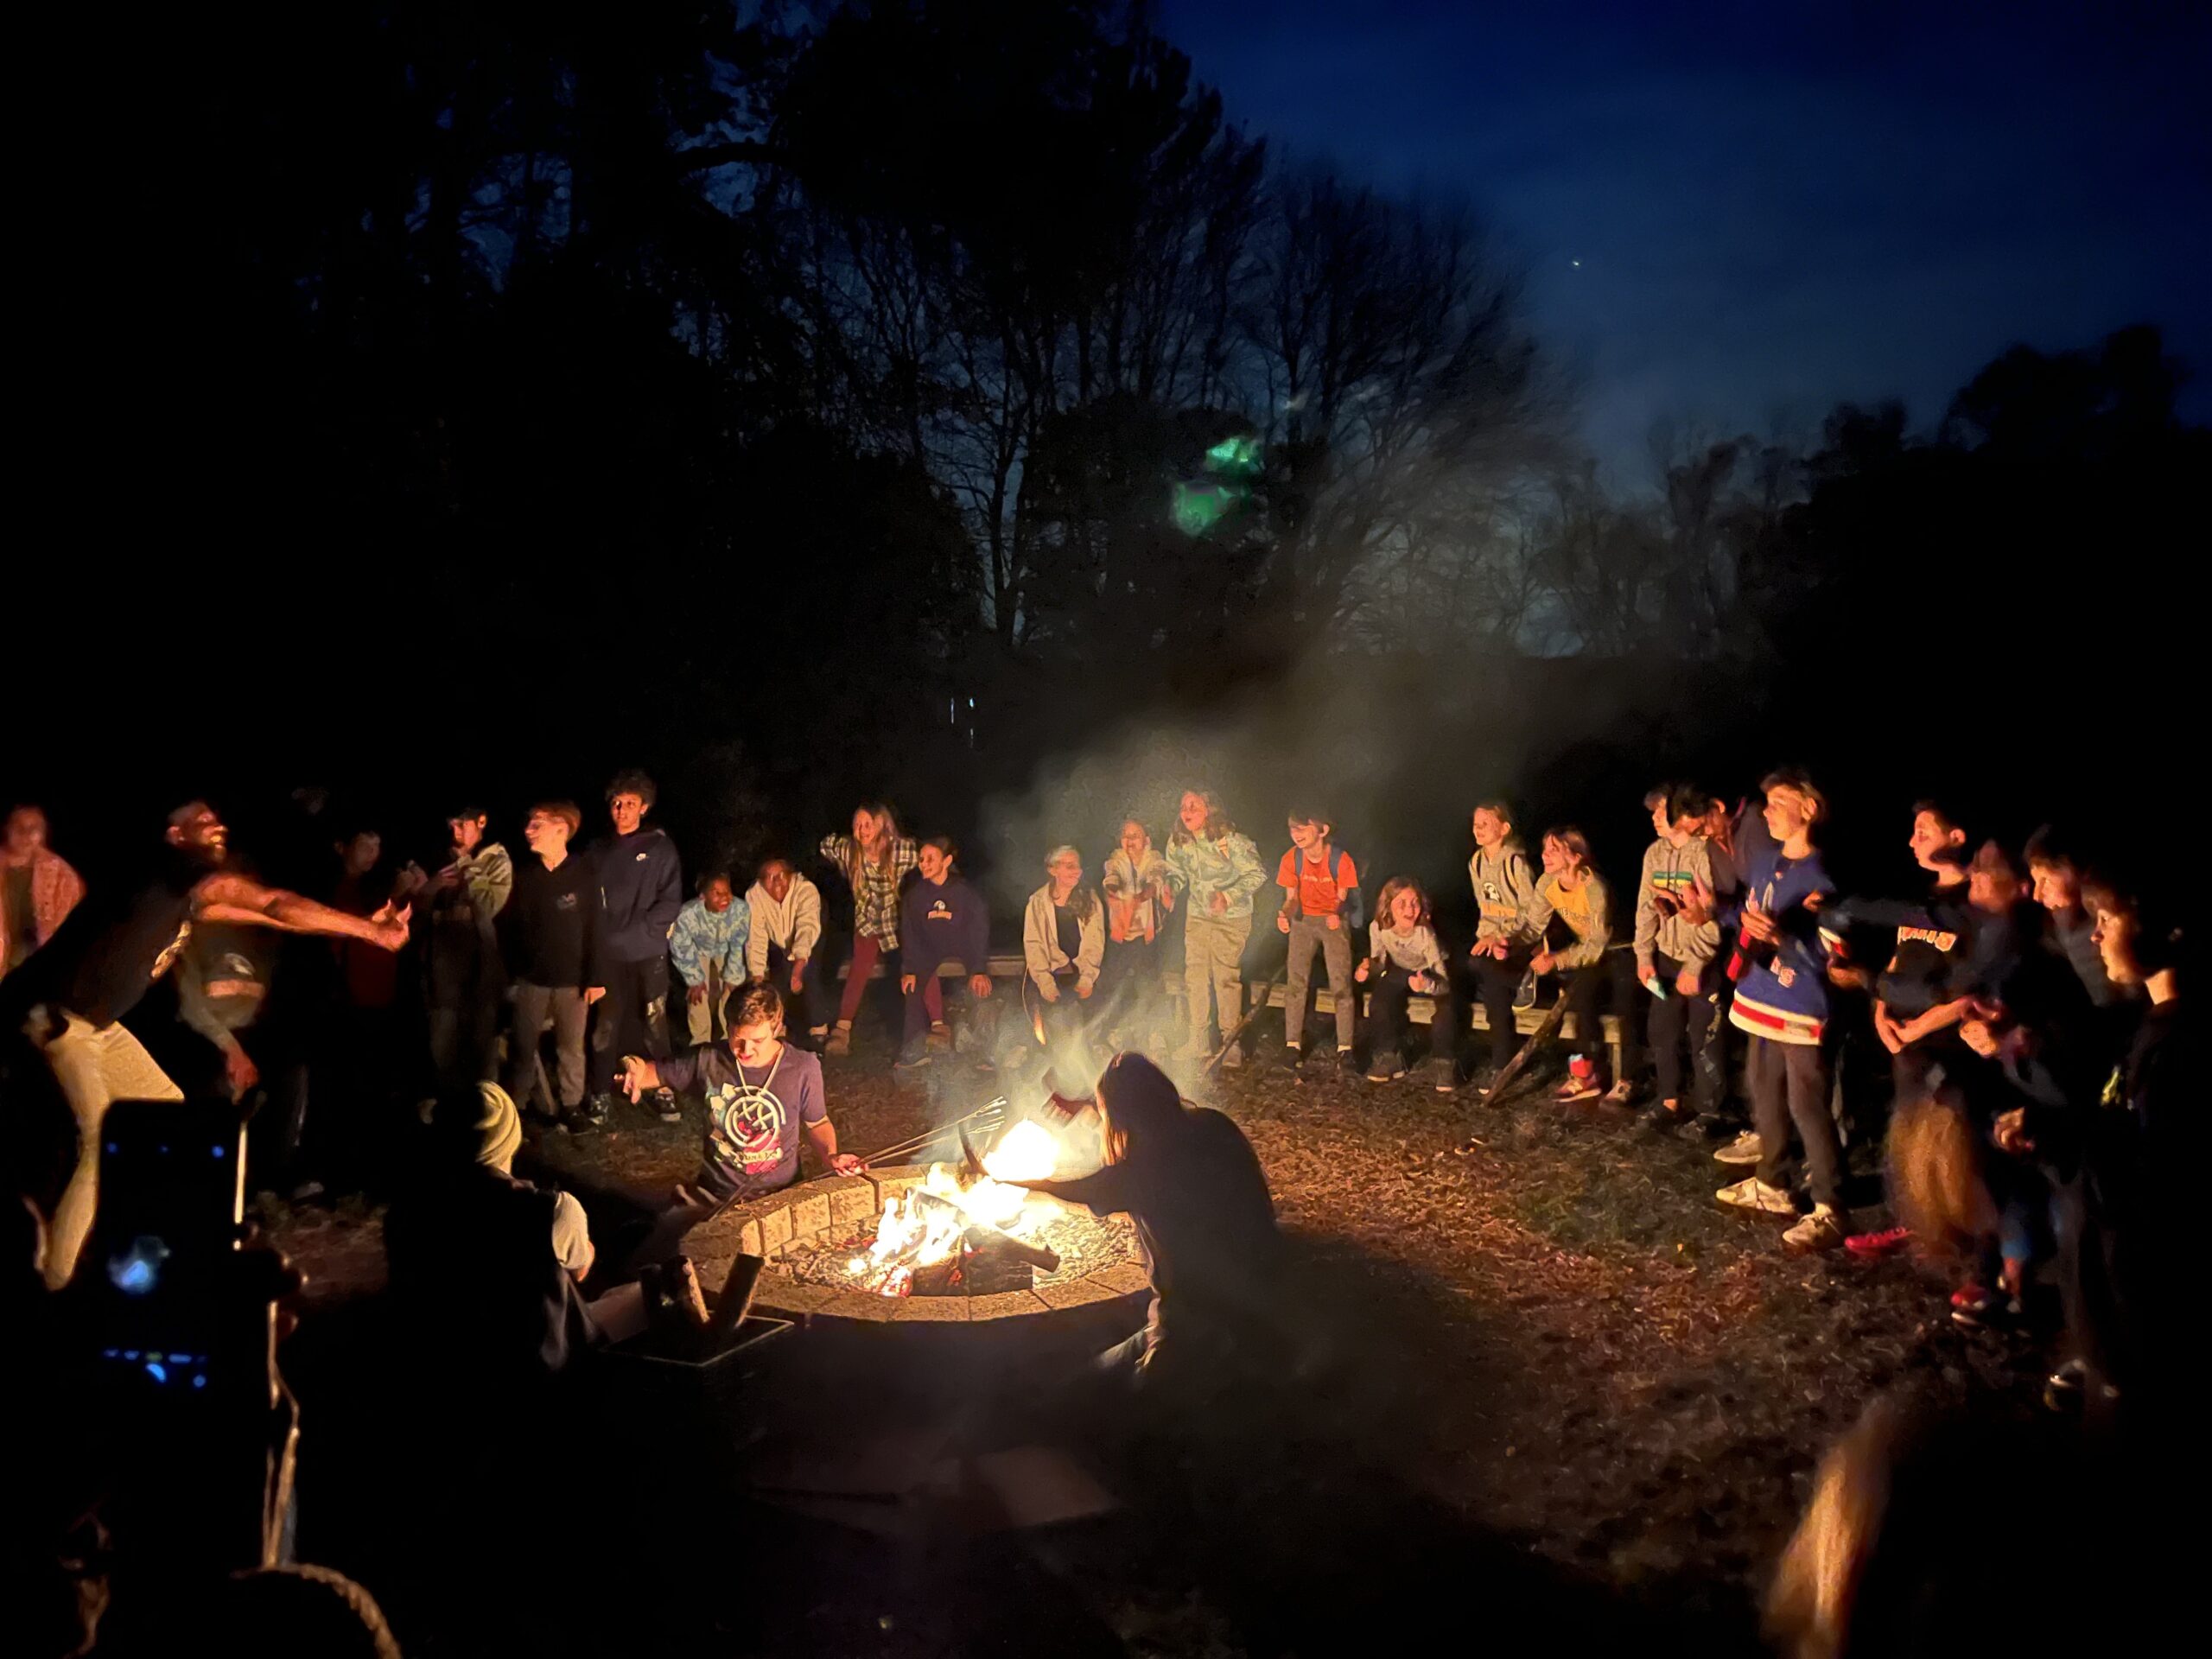 Students sit around firepit at night at Nature's Classroom.